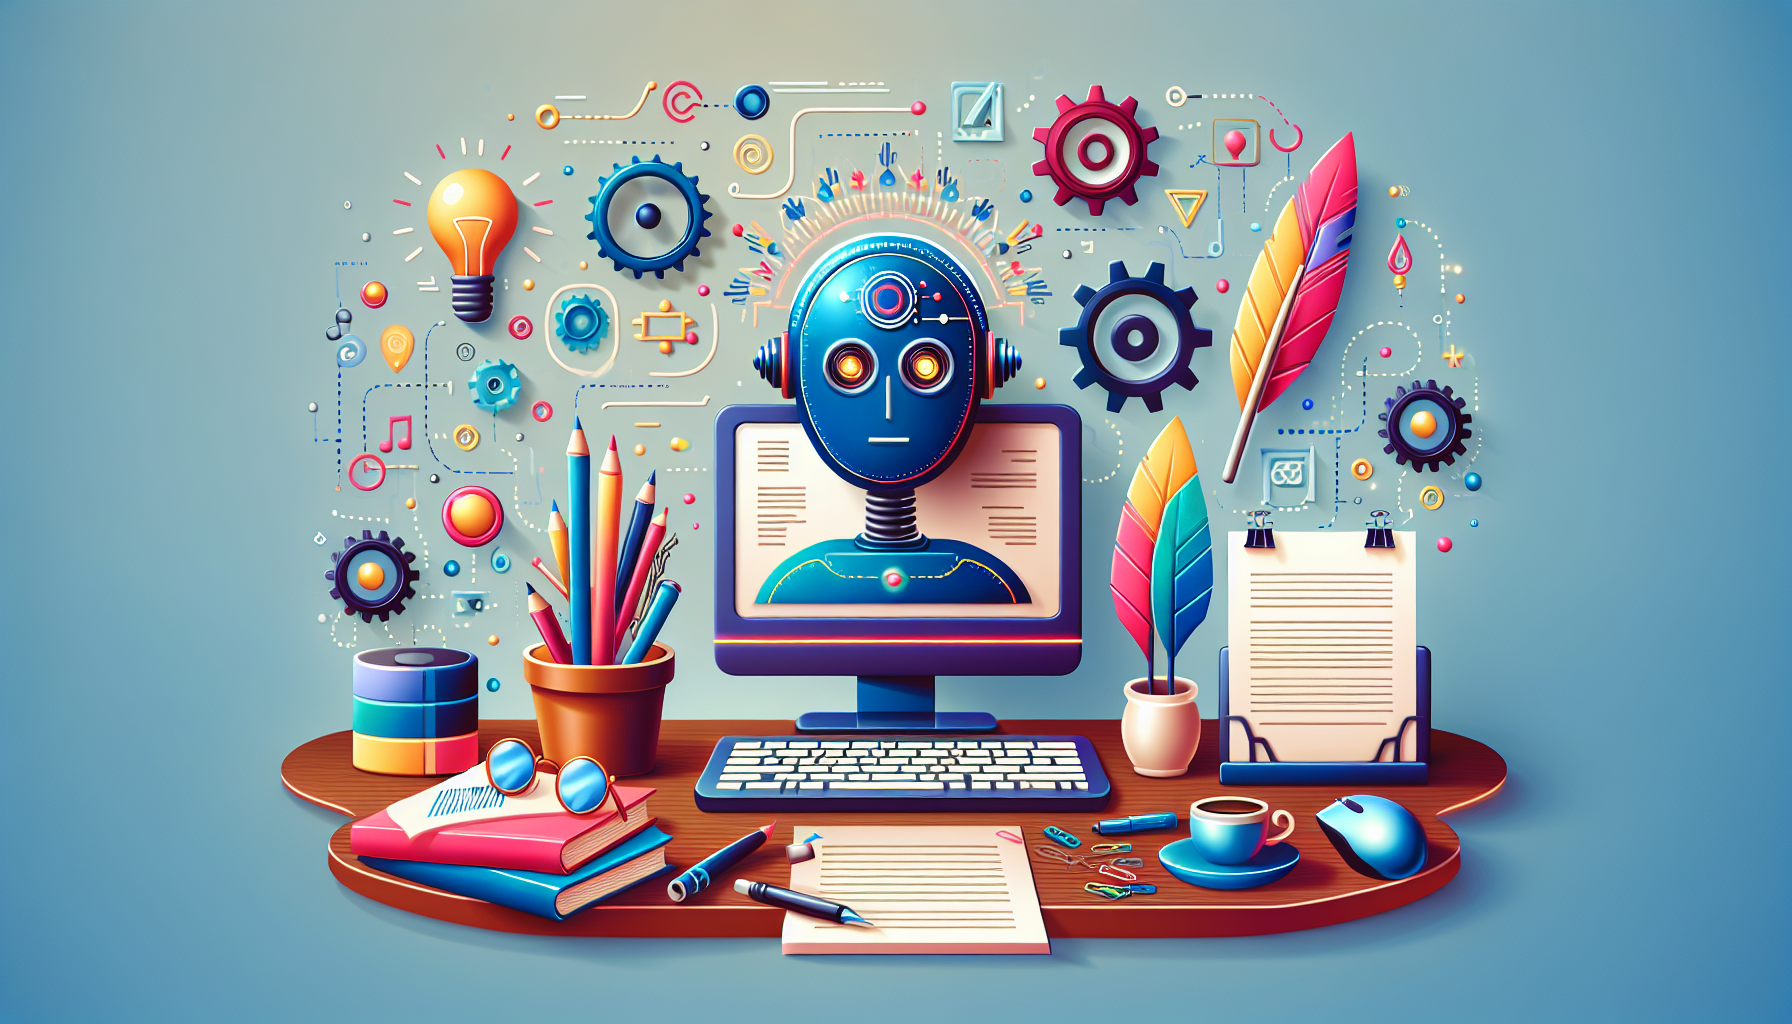 Create a colorful, modern image representing the concept of artificial intelligence writing screenplays. The scene can have a futuristic computer or robot, placed near a writing desk with various screenwriting tools such as a script, a feather pen, and inkwell, symbolizing traditional scriptwriting. Also, include symbols of creativity, such as a light bulb or a cogwheel, to show AI's creative capabilities.